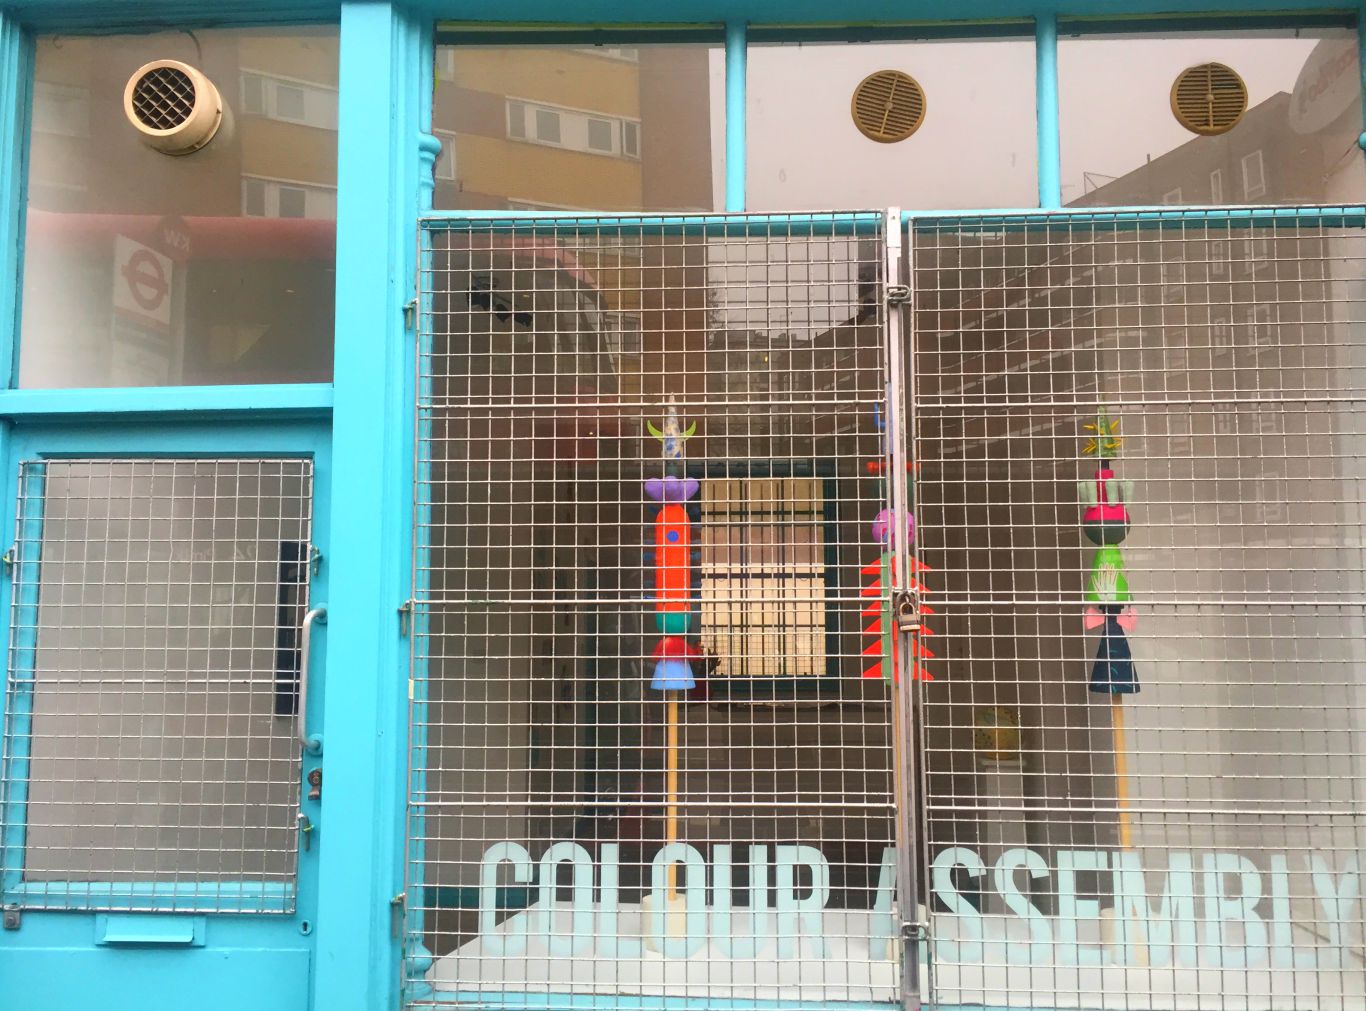 Colour Assembly is on for just a week on Malden Road. Photo: SE